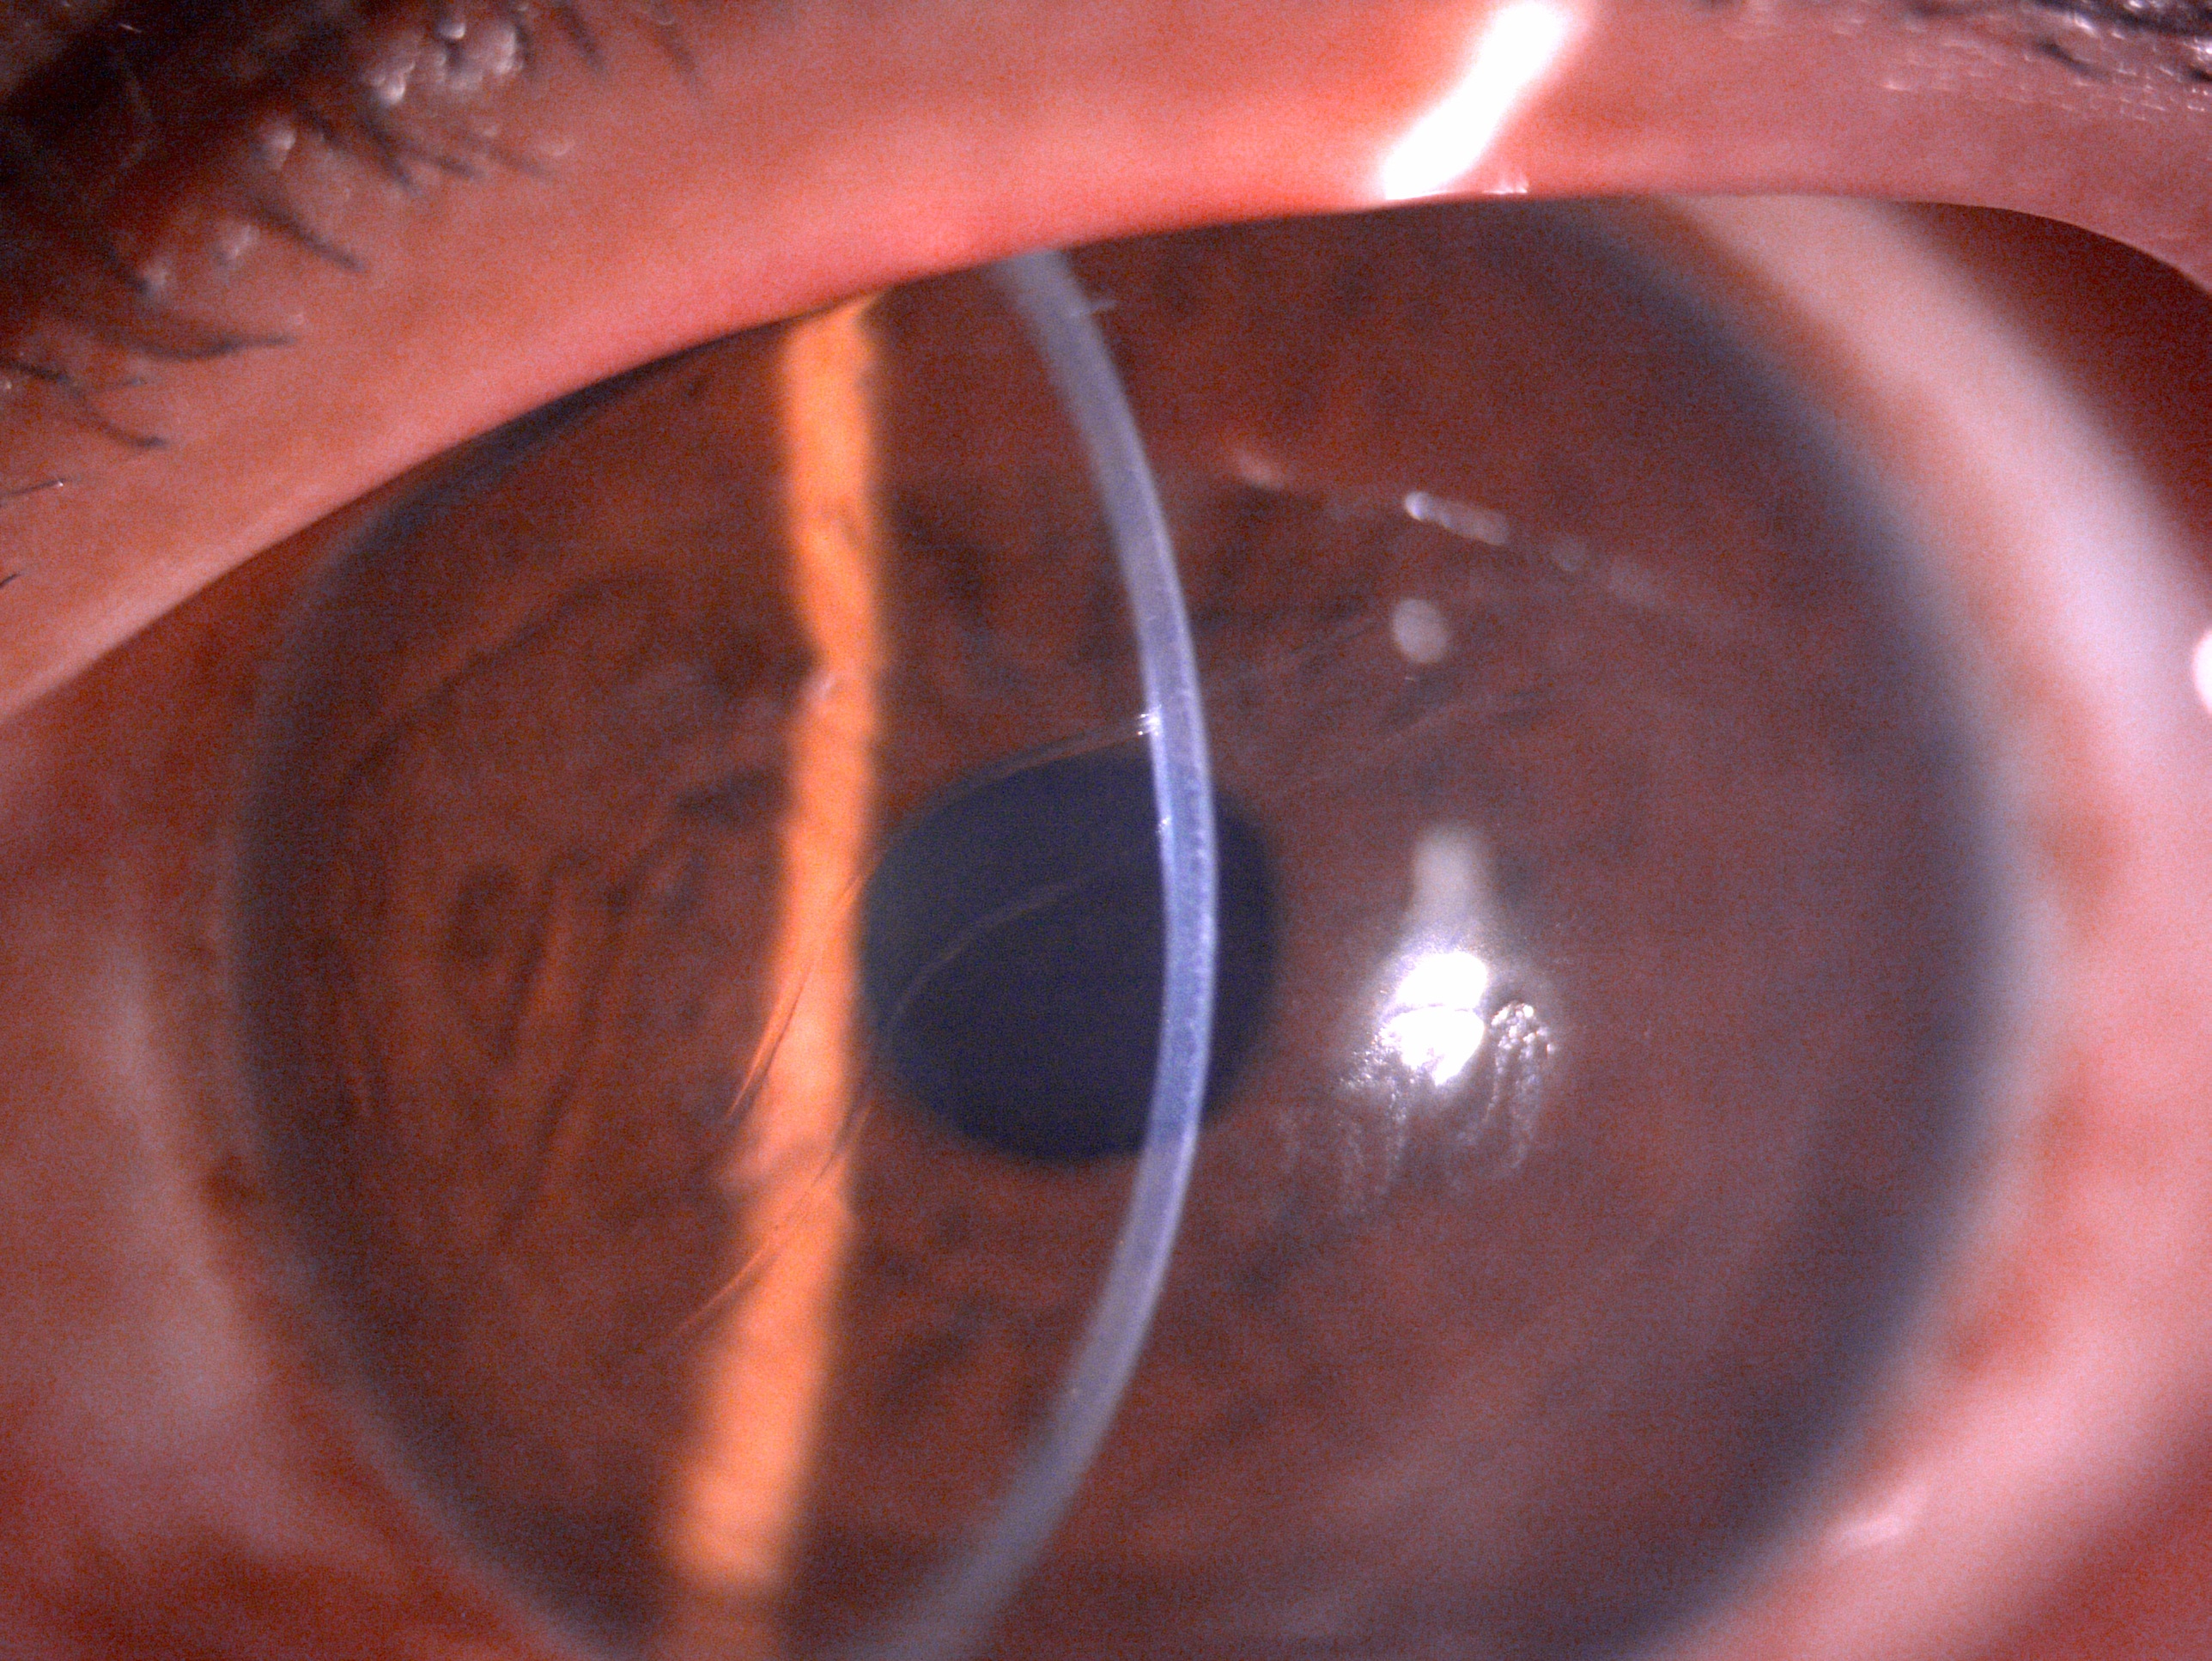 Slit lamp image of the child depicting megalocornea and horizontal oblique breaks in descemet membrane suggestive of Haab's striae secondary to raised intraocular pressure and stretching of the cornea